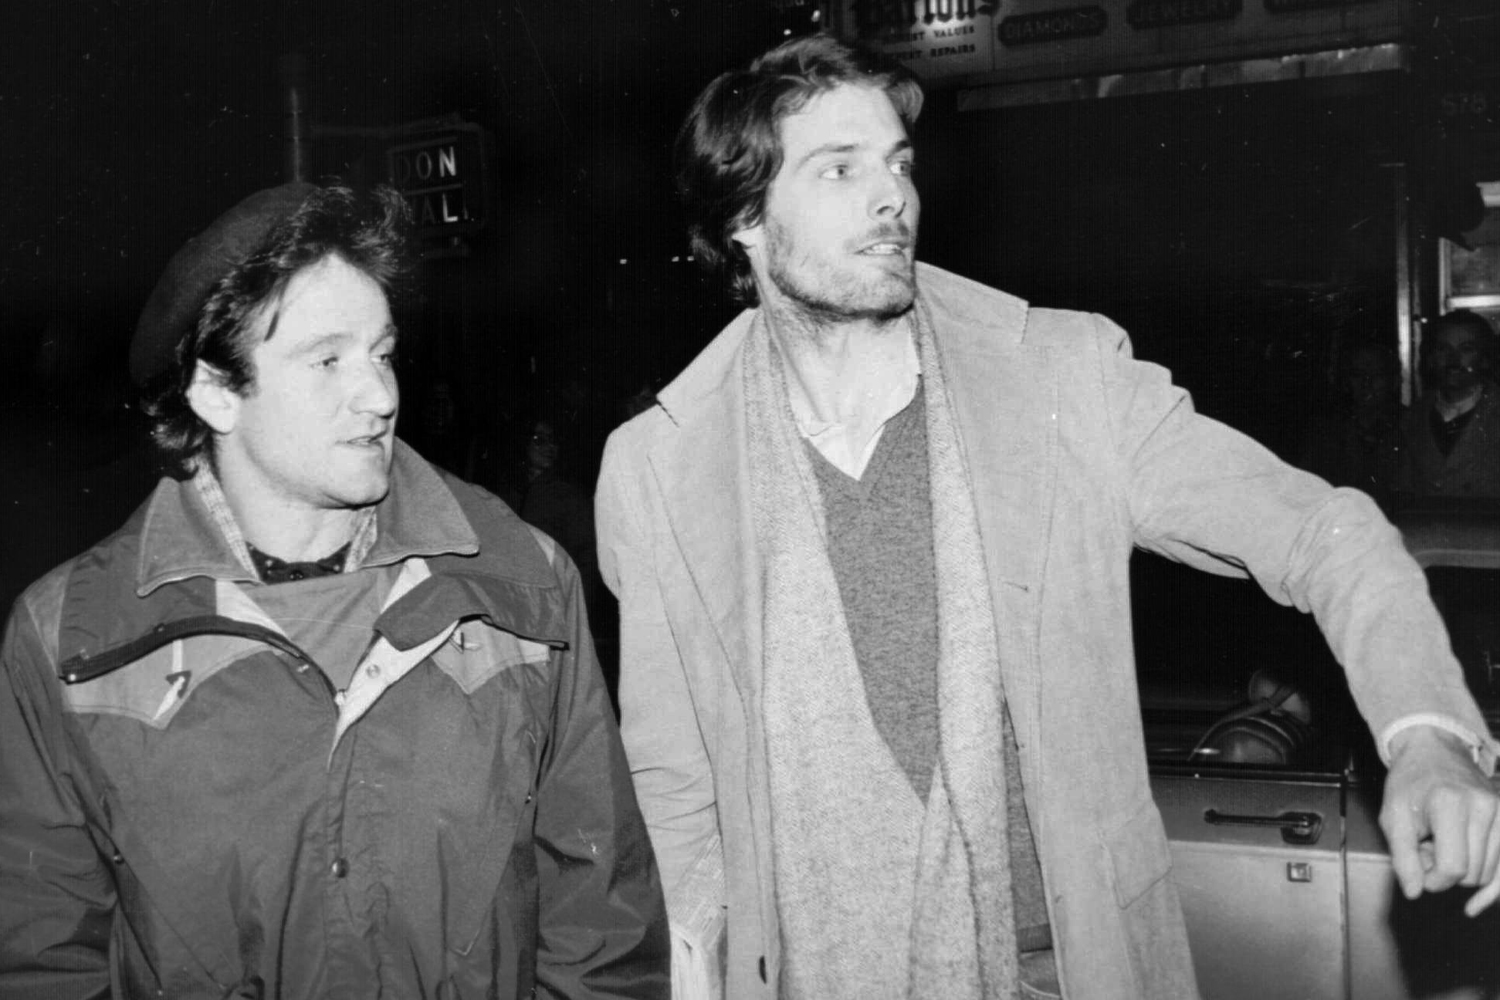 Robin Williams, left, and Christopher Reeve, attempt to hail a taxicab in New York City on Feb. 9, 1981. Williams went to see Reeve, who is appearing in the play "The Fifth of July", backstage after his performance Friday night. (Steve Sands – AP)